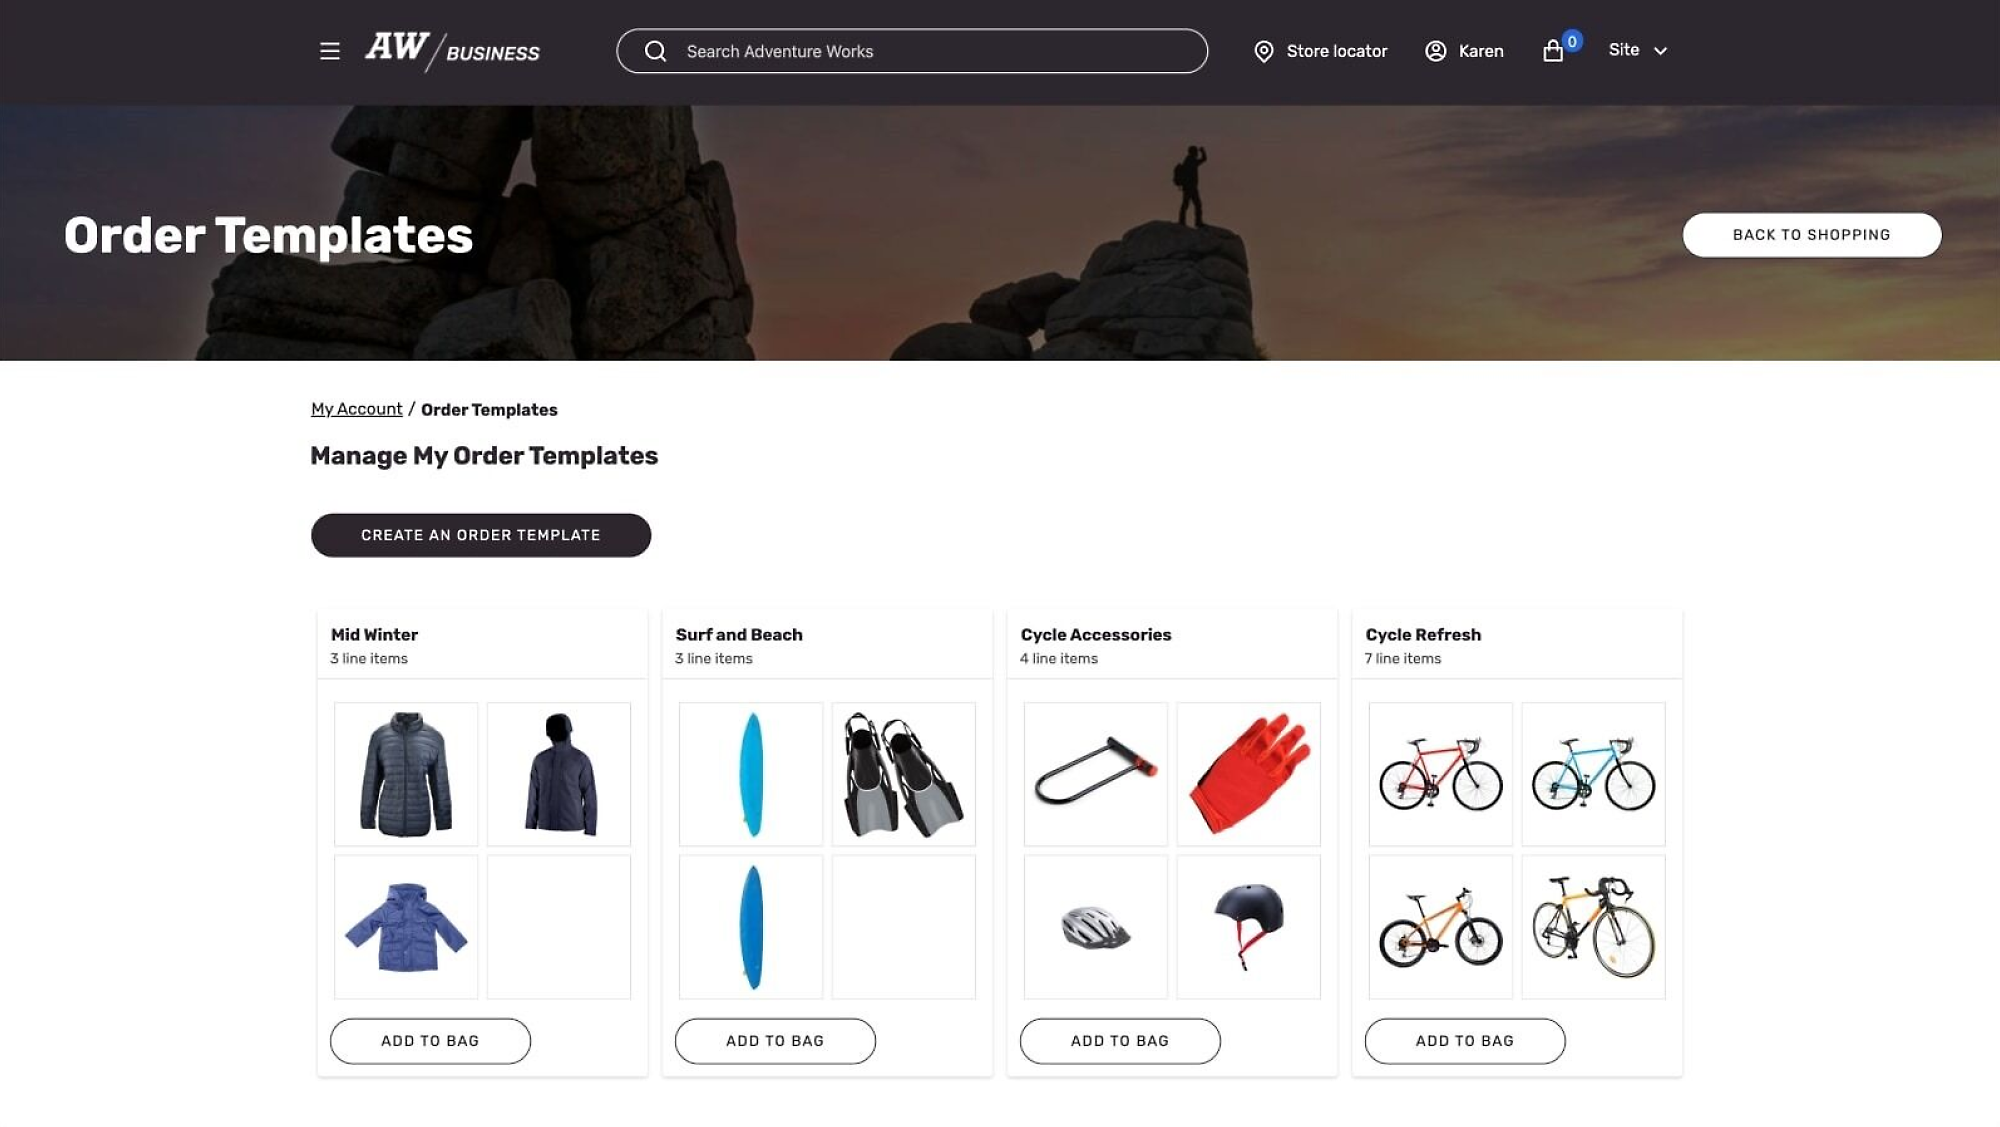 Adventure Works page showing order templates, shopping options, and add to bag buttons